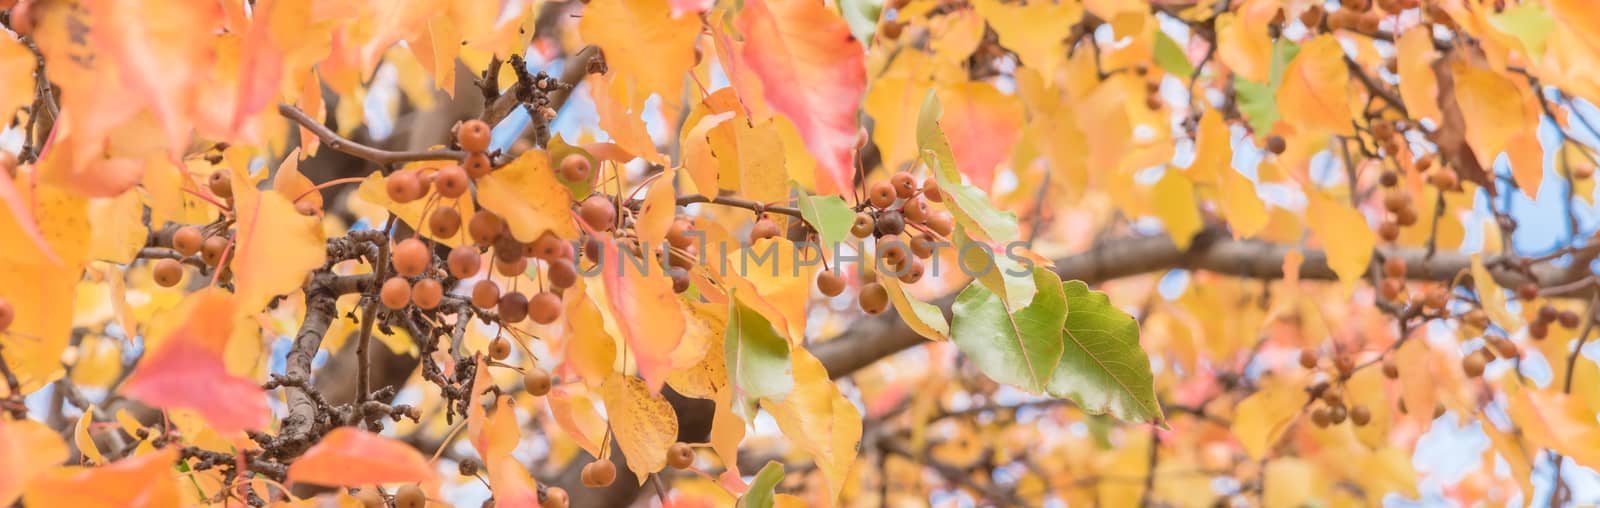 Panorama view fall colors on Bradford pear tree leaves and fruits with combinations of green, orange, yellow, red. Beautiful changing season and autumn background in Texas, America.